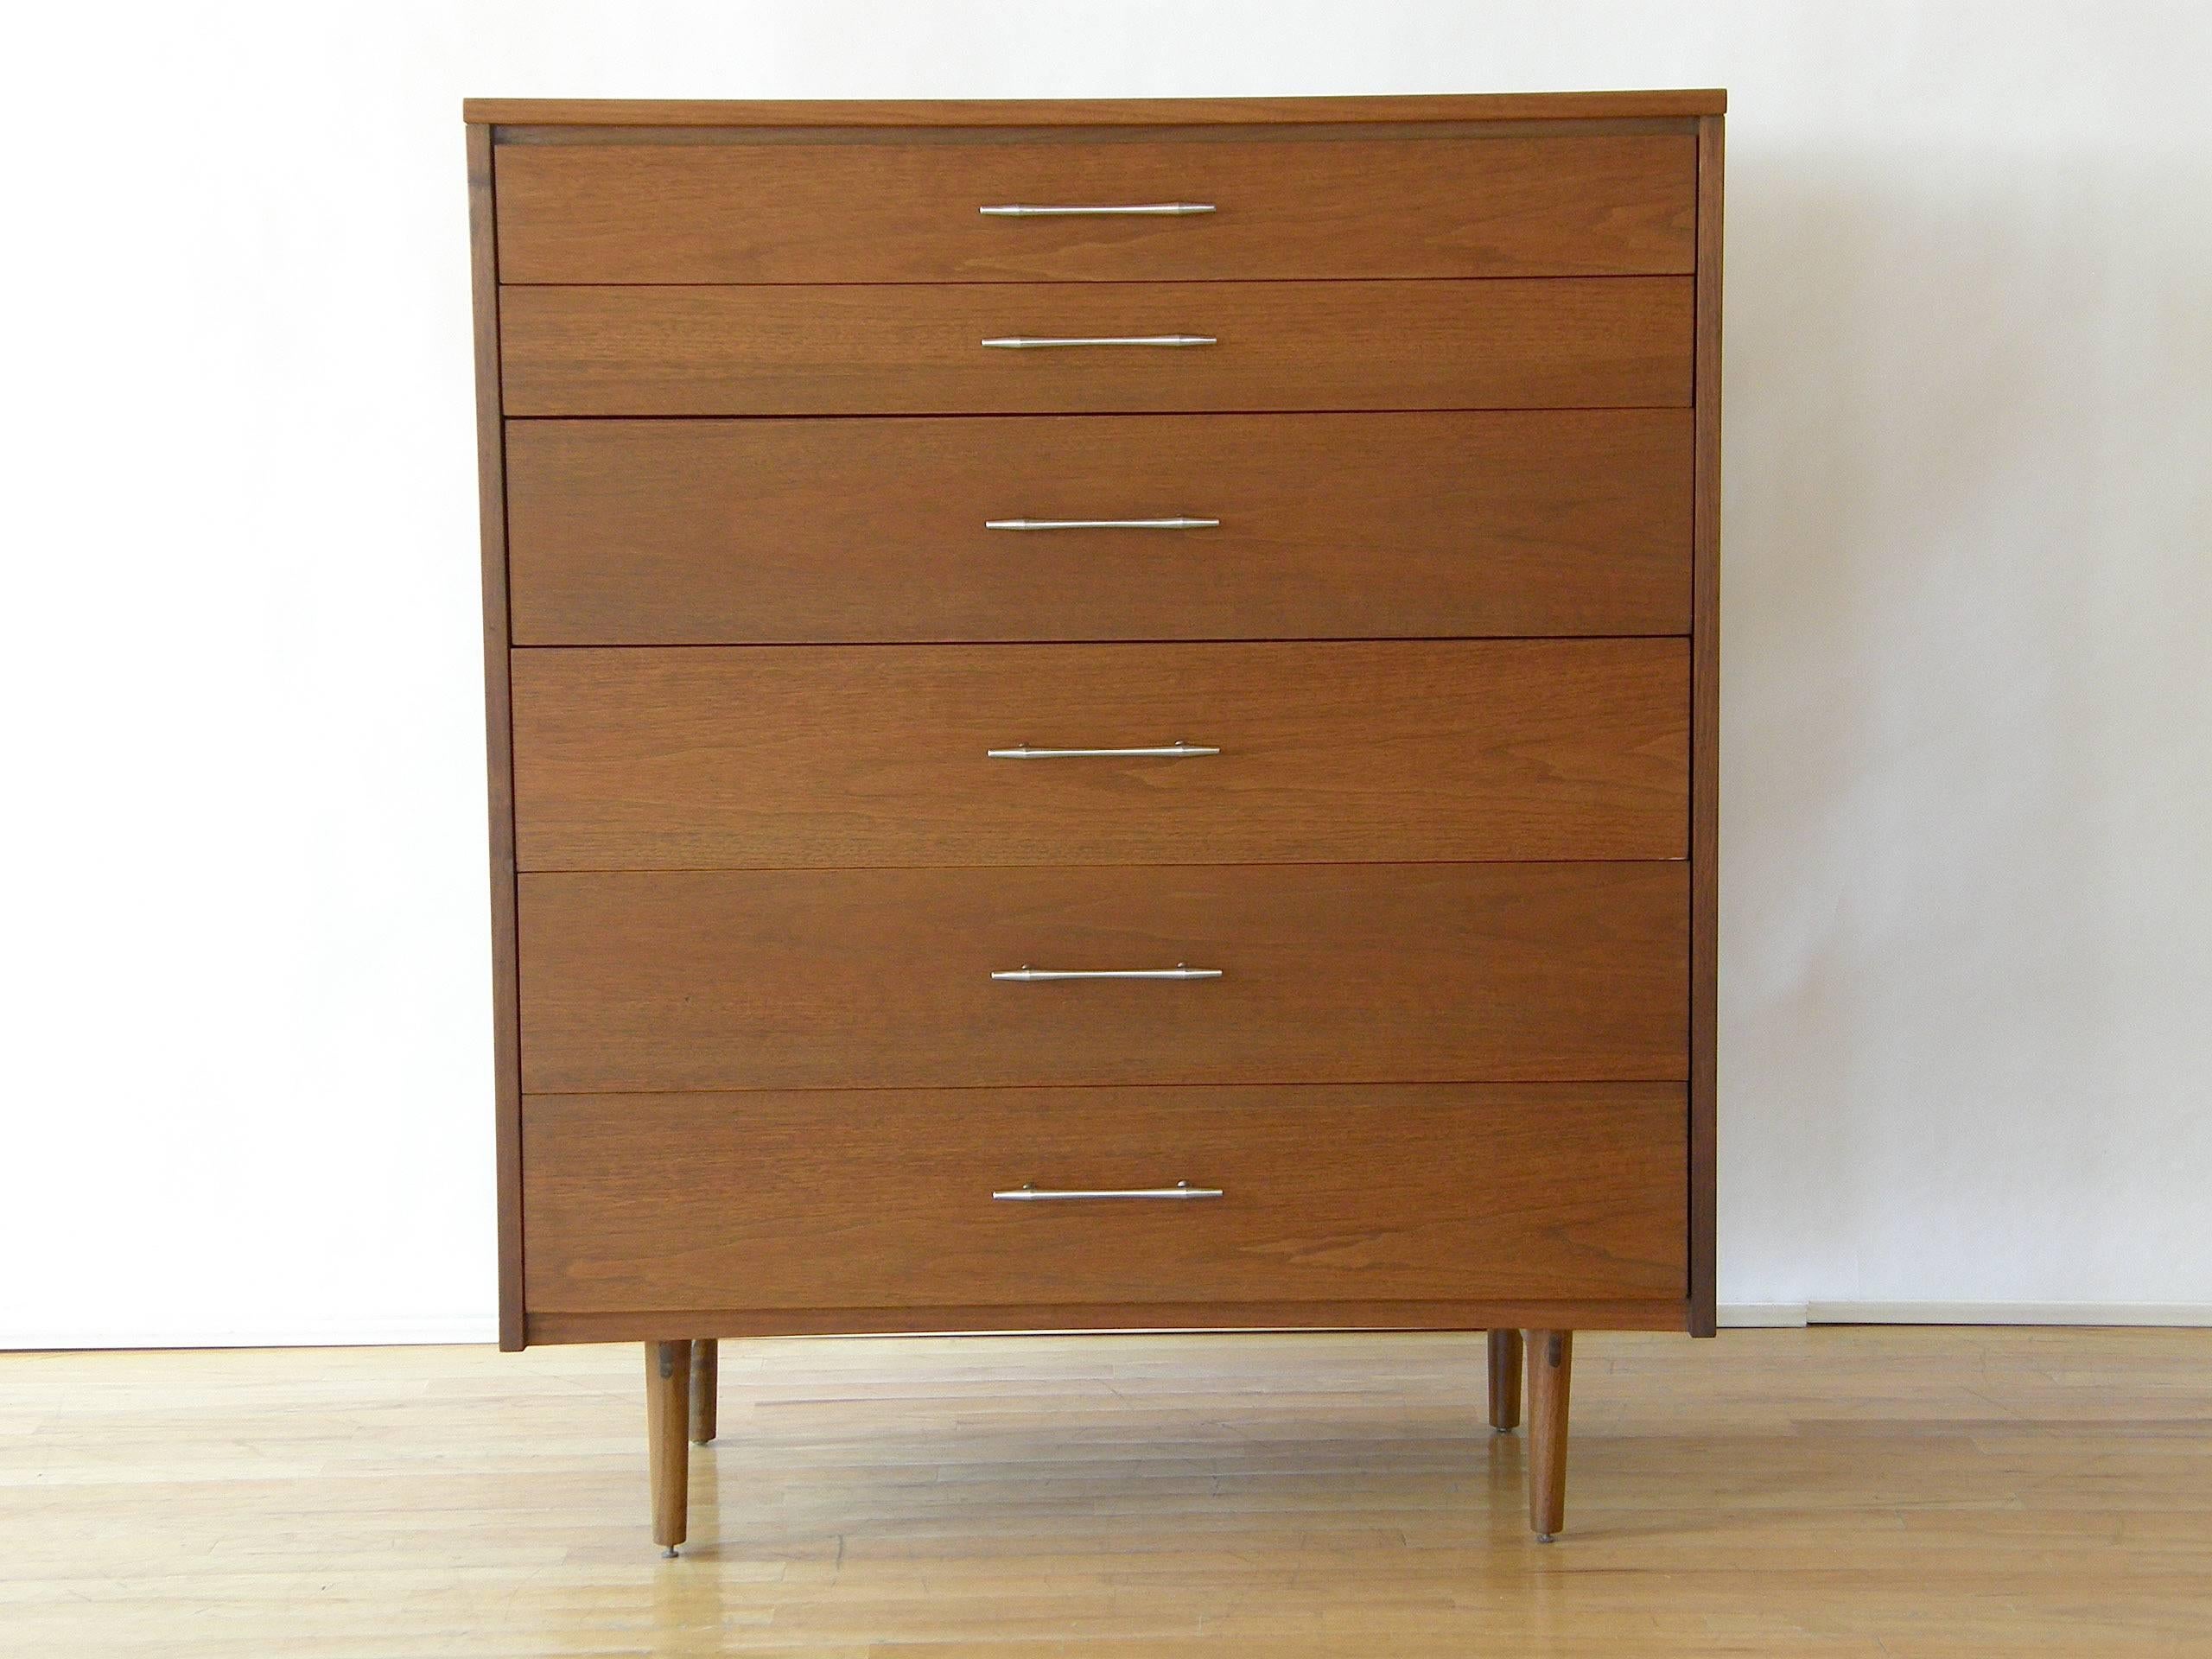 This Paul McCobb six drawer dresser for Calvin has tapering dowel legs and elongated machined aluminium pulls.

Please contact us if you have any questions.